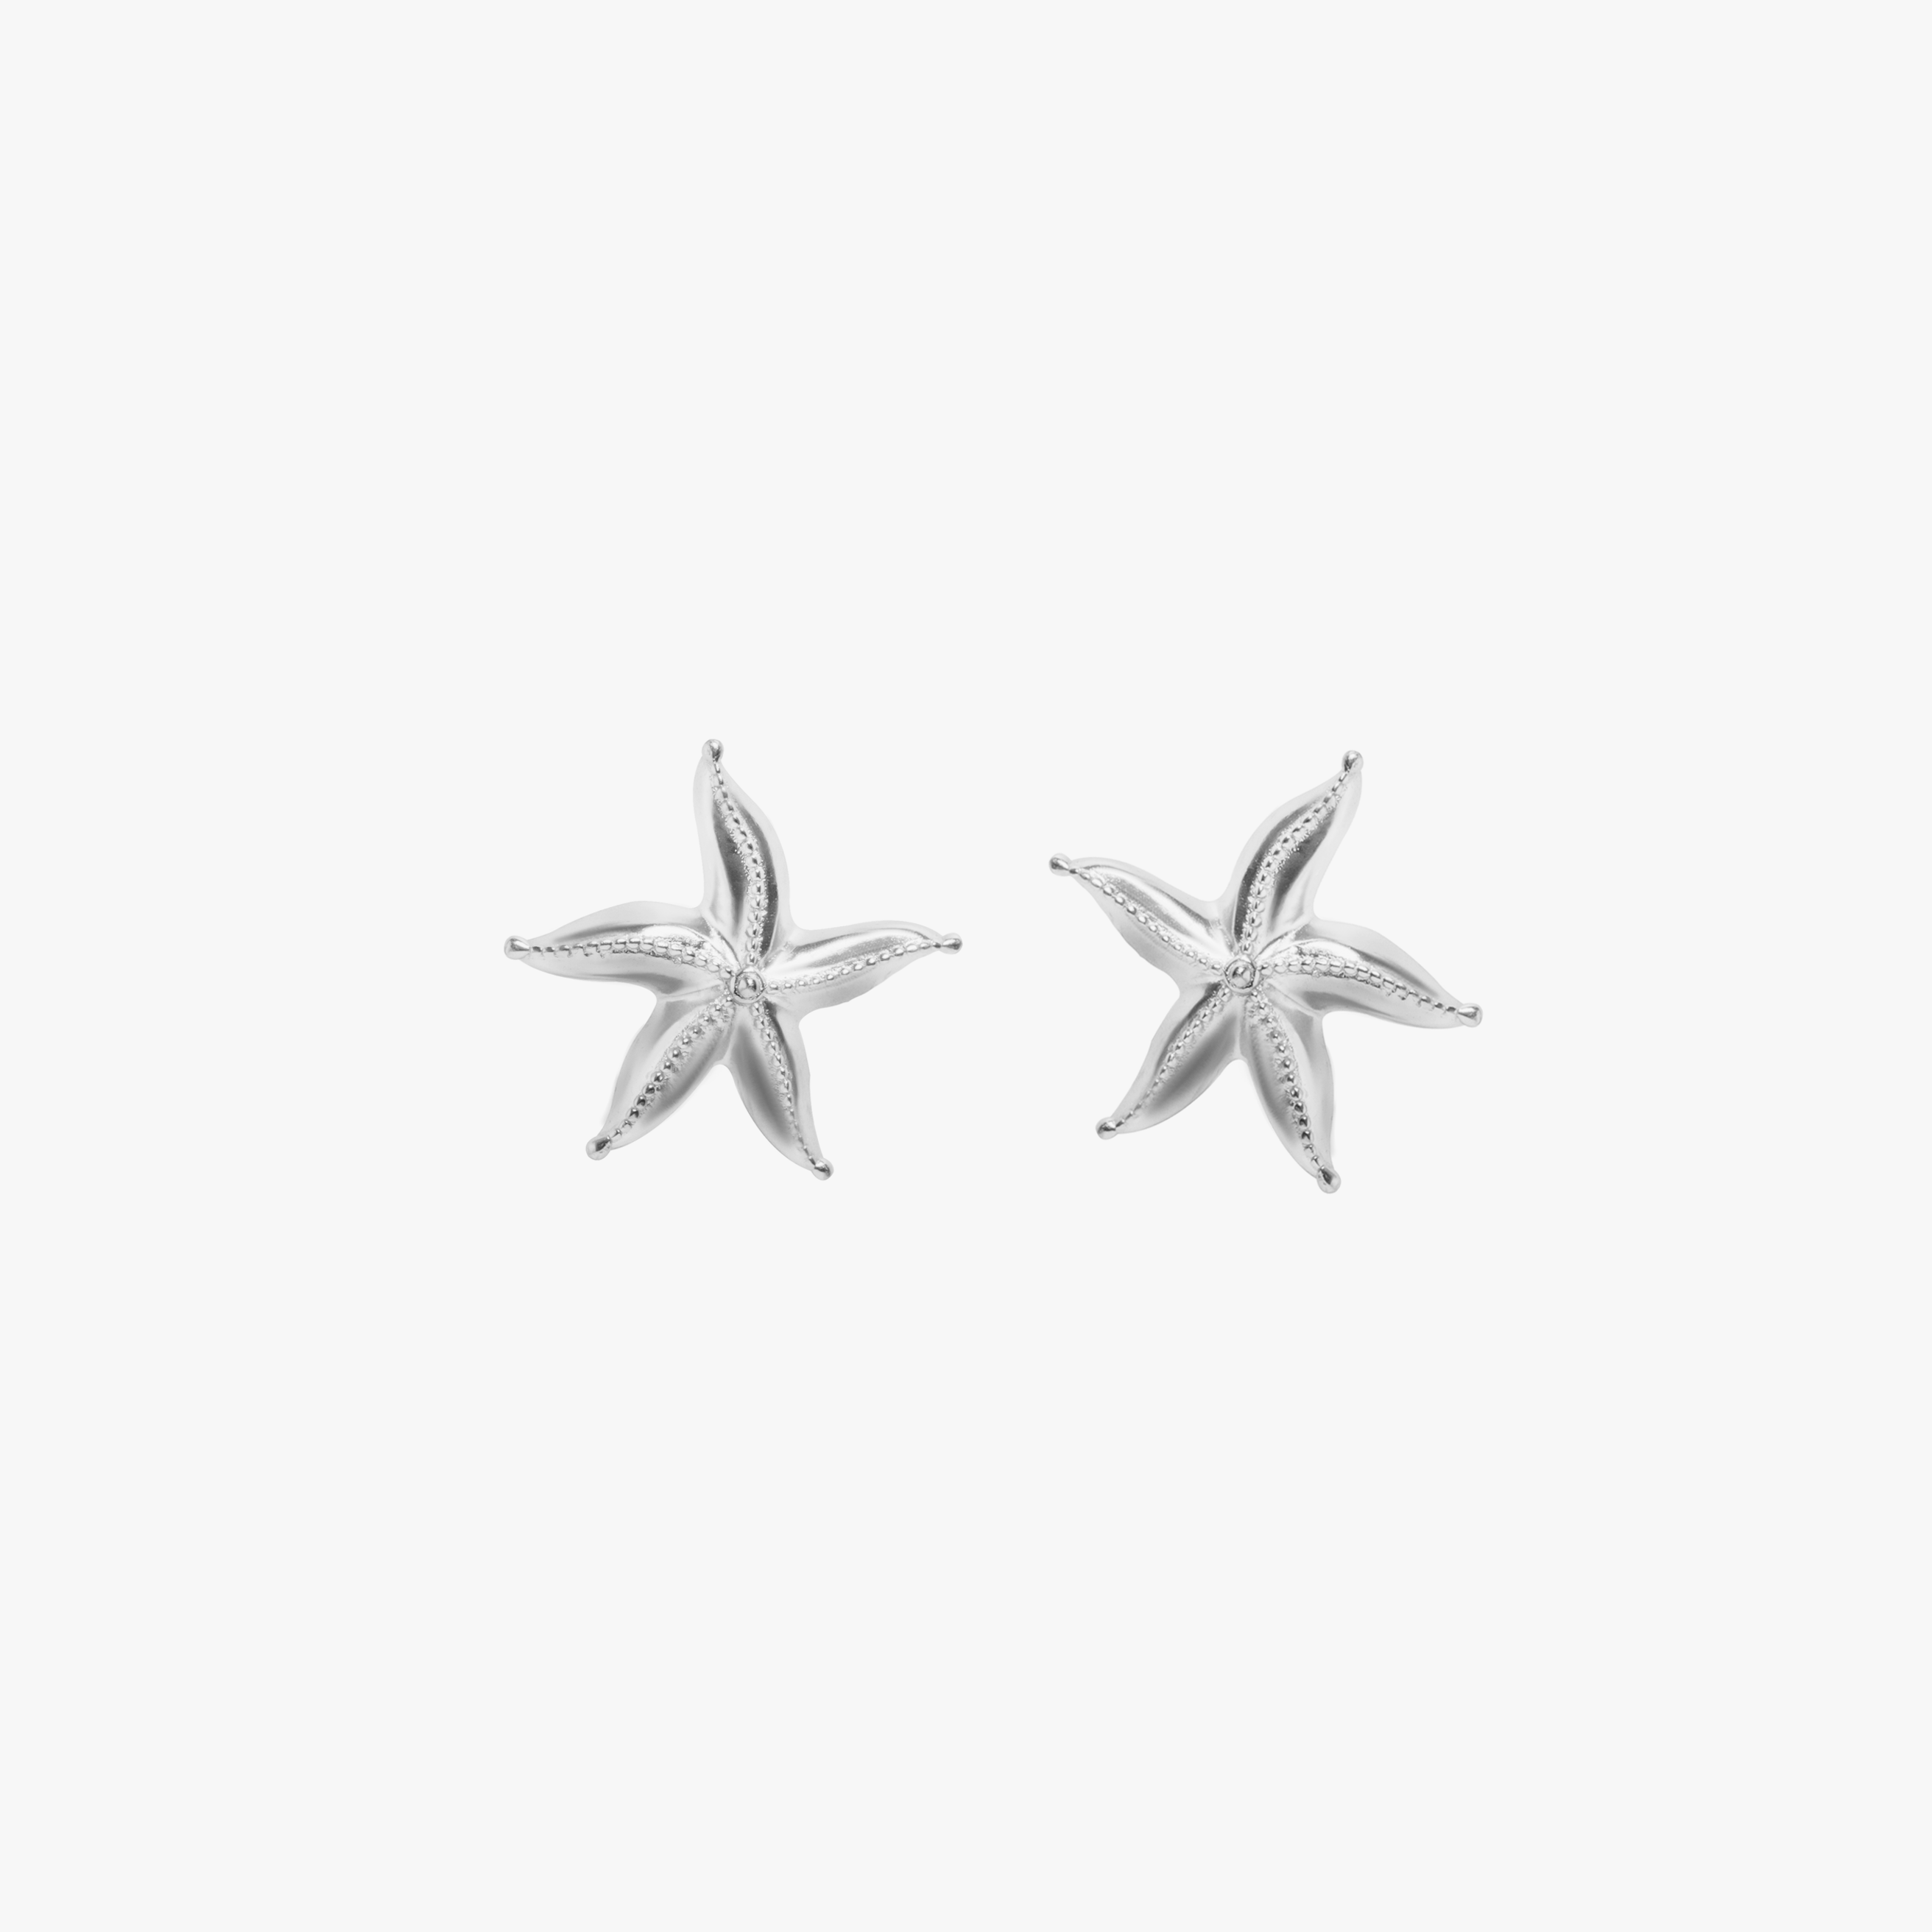 SEA STAR STUDS SILVER TONE , a product by Equiivalence